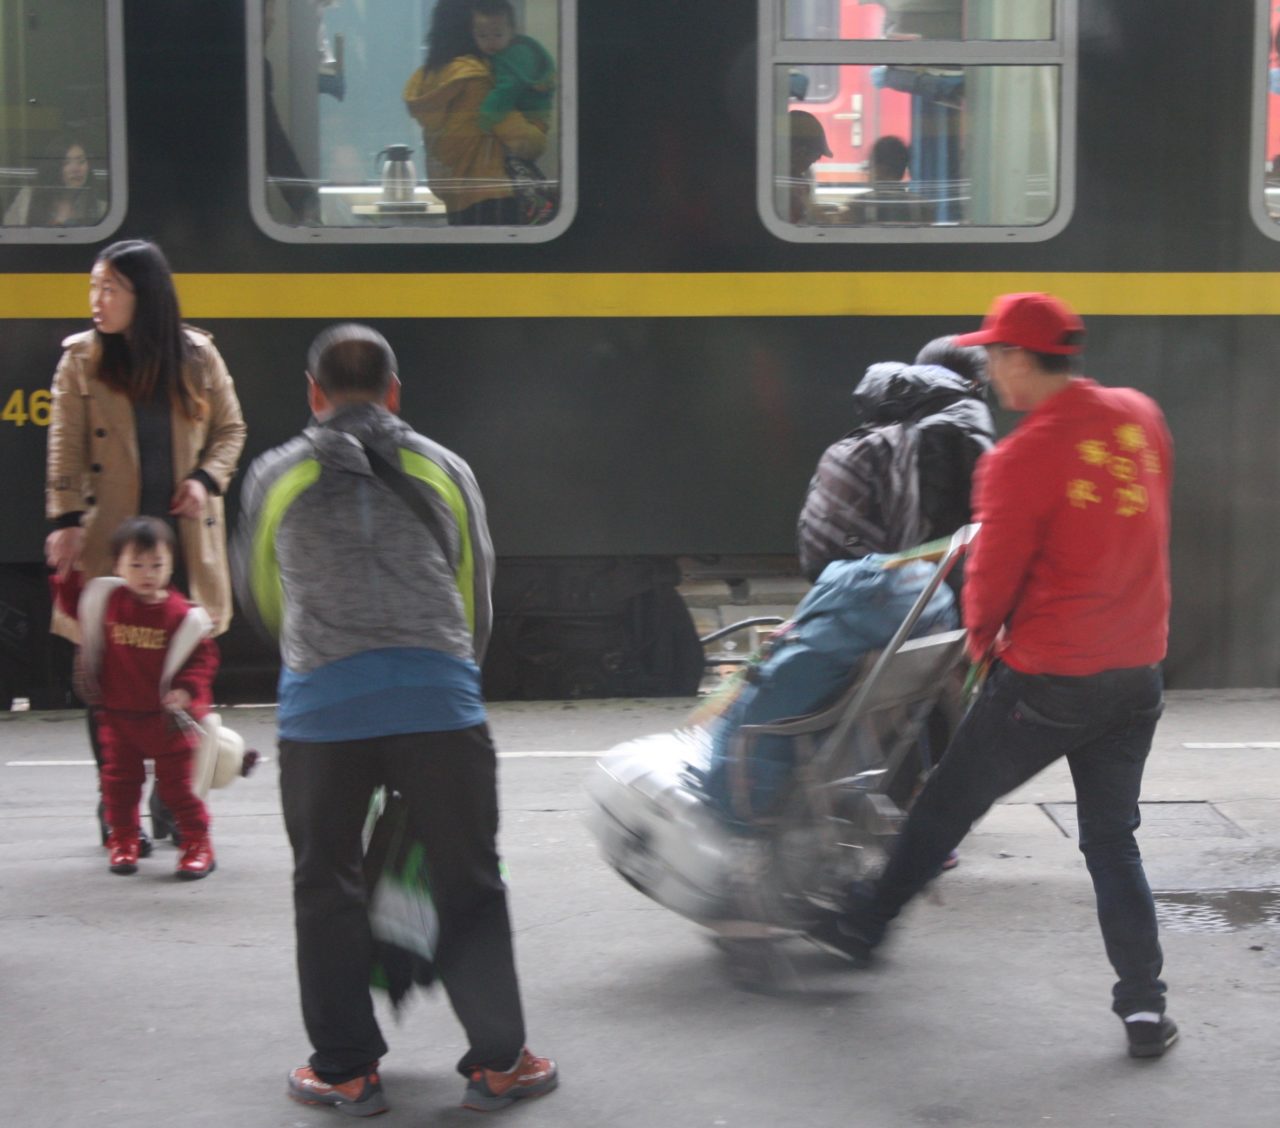 Taking a Slow Train from China: New passengers join the train